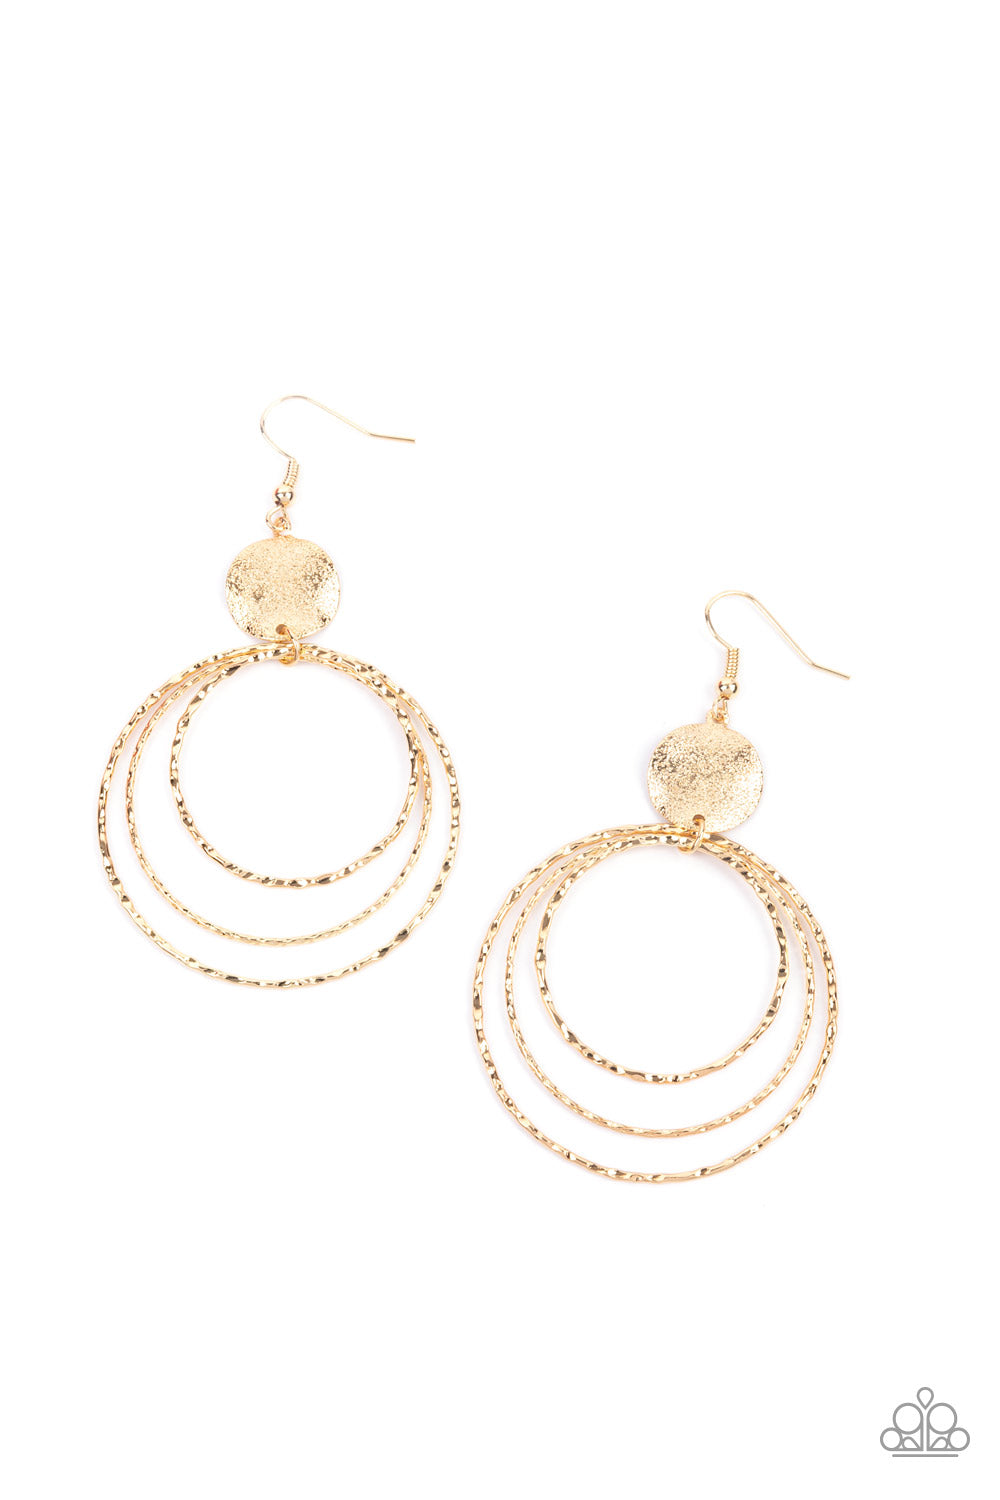 Universal Rehearsal Gold Earring - Paparazzi Accessories  A shimmery wavy gold disc links atop a collection of three delicately hammered gold rings in concentric sizes for an out-of-this-world finish. Earring attaches to a standard fishhook fitting.  All Paparazzi Accessories are lead free and nickel free!  Sold as one pair of earrings.